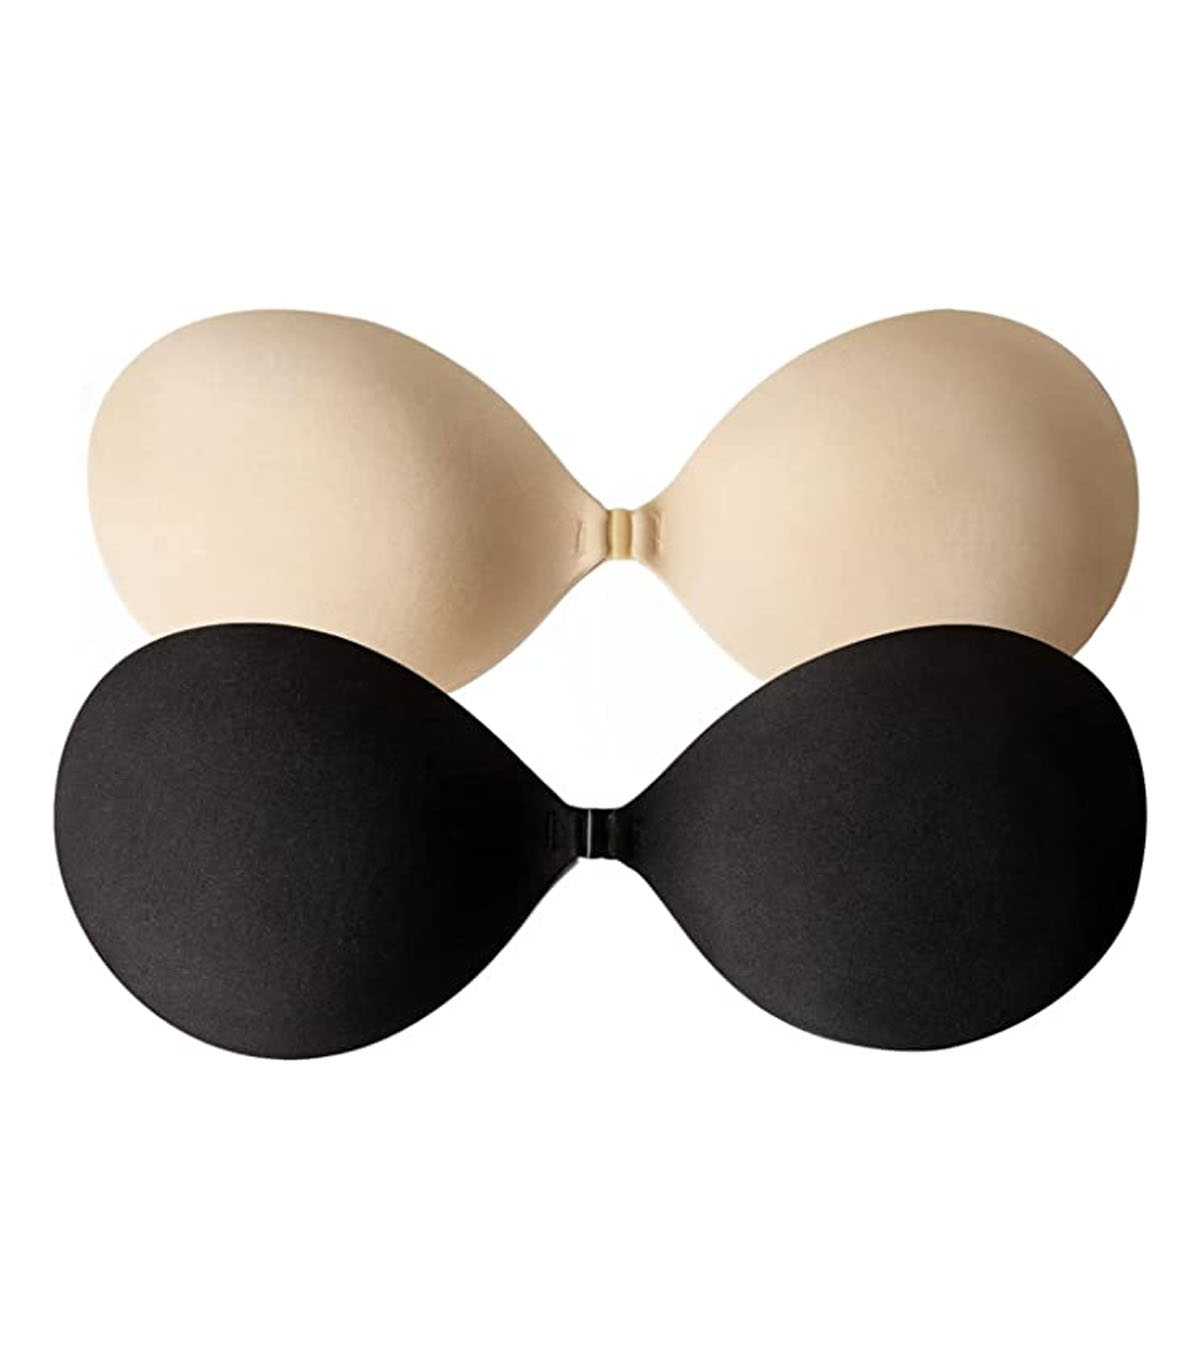 2 Pairs AVERYN Adhesive Bra Breast Lift Strapless Backless Bra Nippless Covers Push Up Self Invisible Sticky Bra for Women